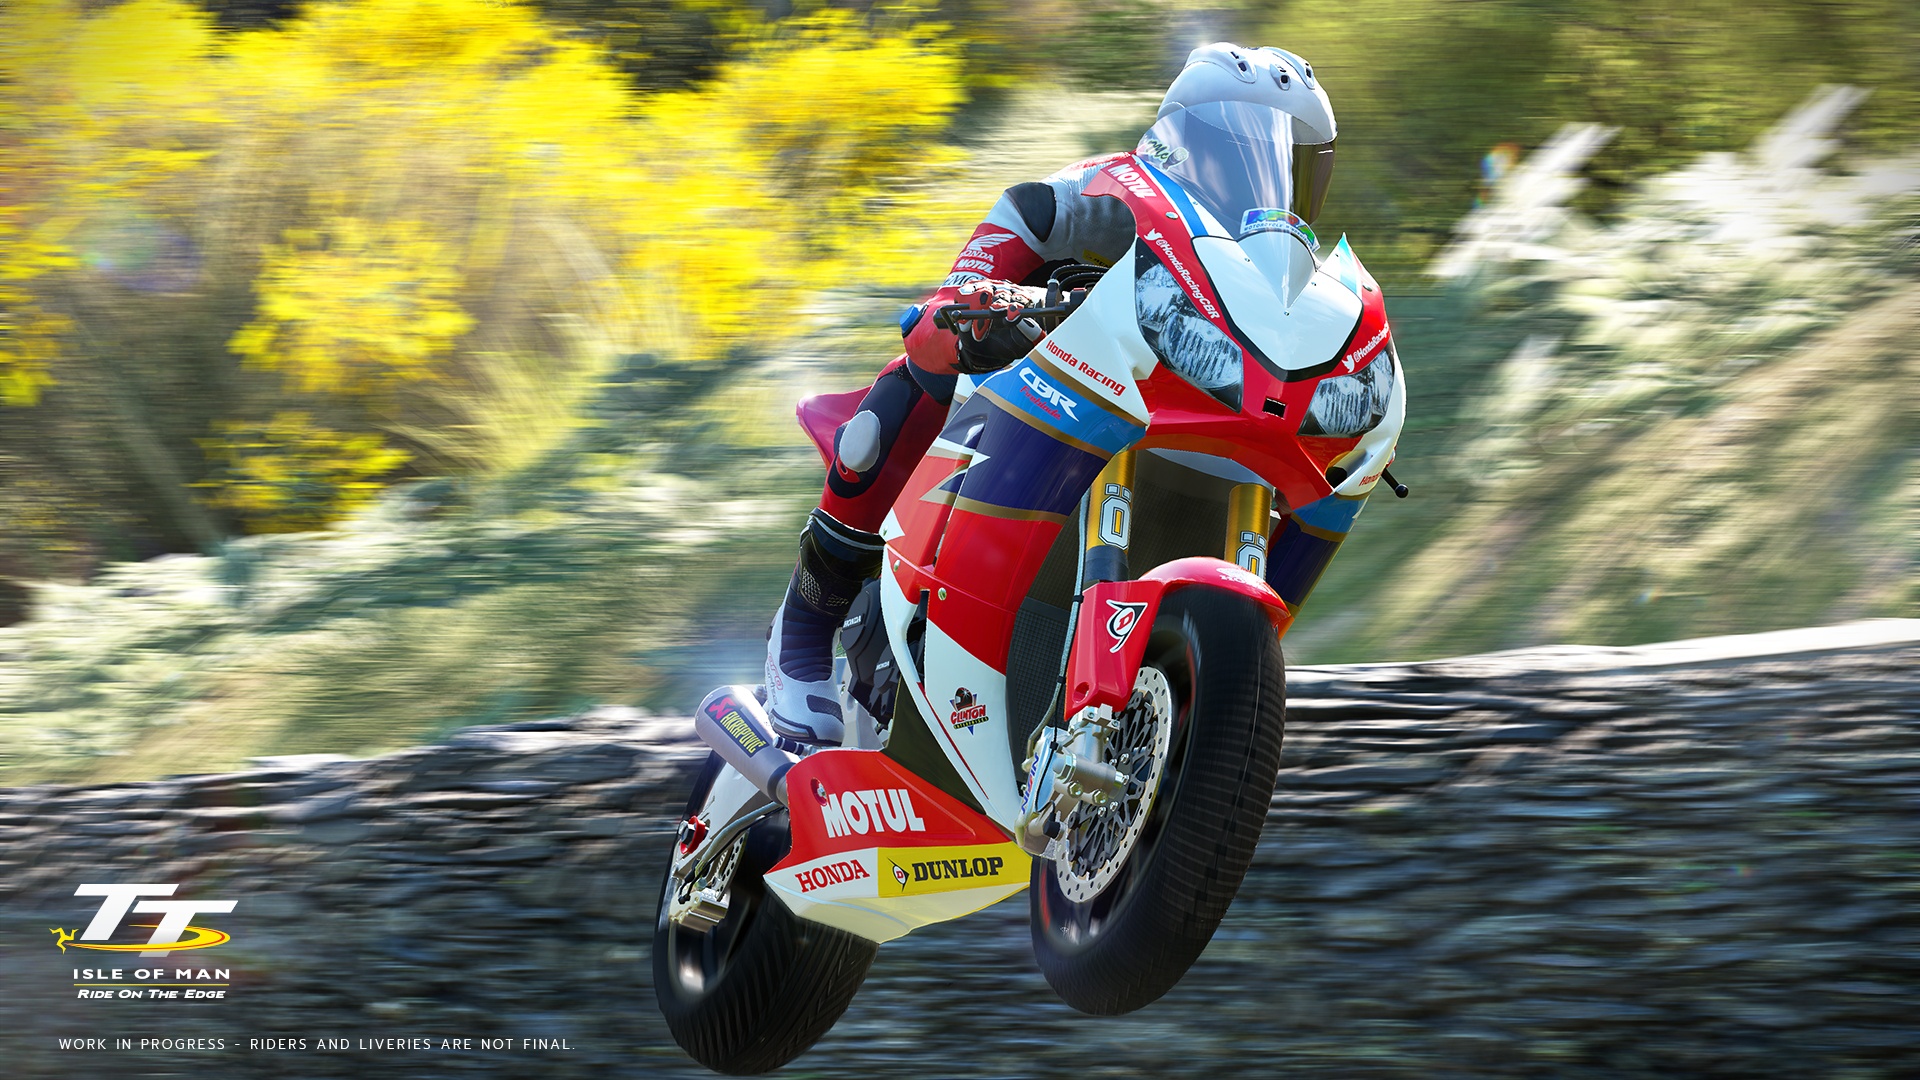 TT Isle of Man – Release Date and Gameplay Trailer